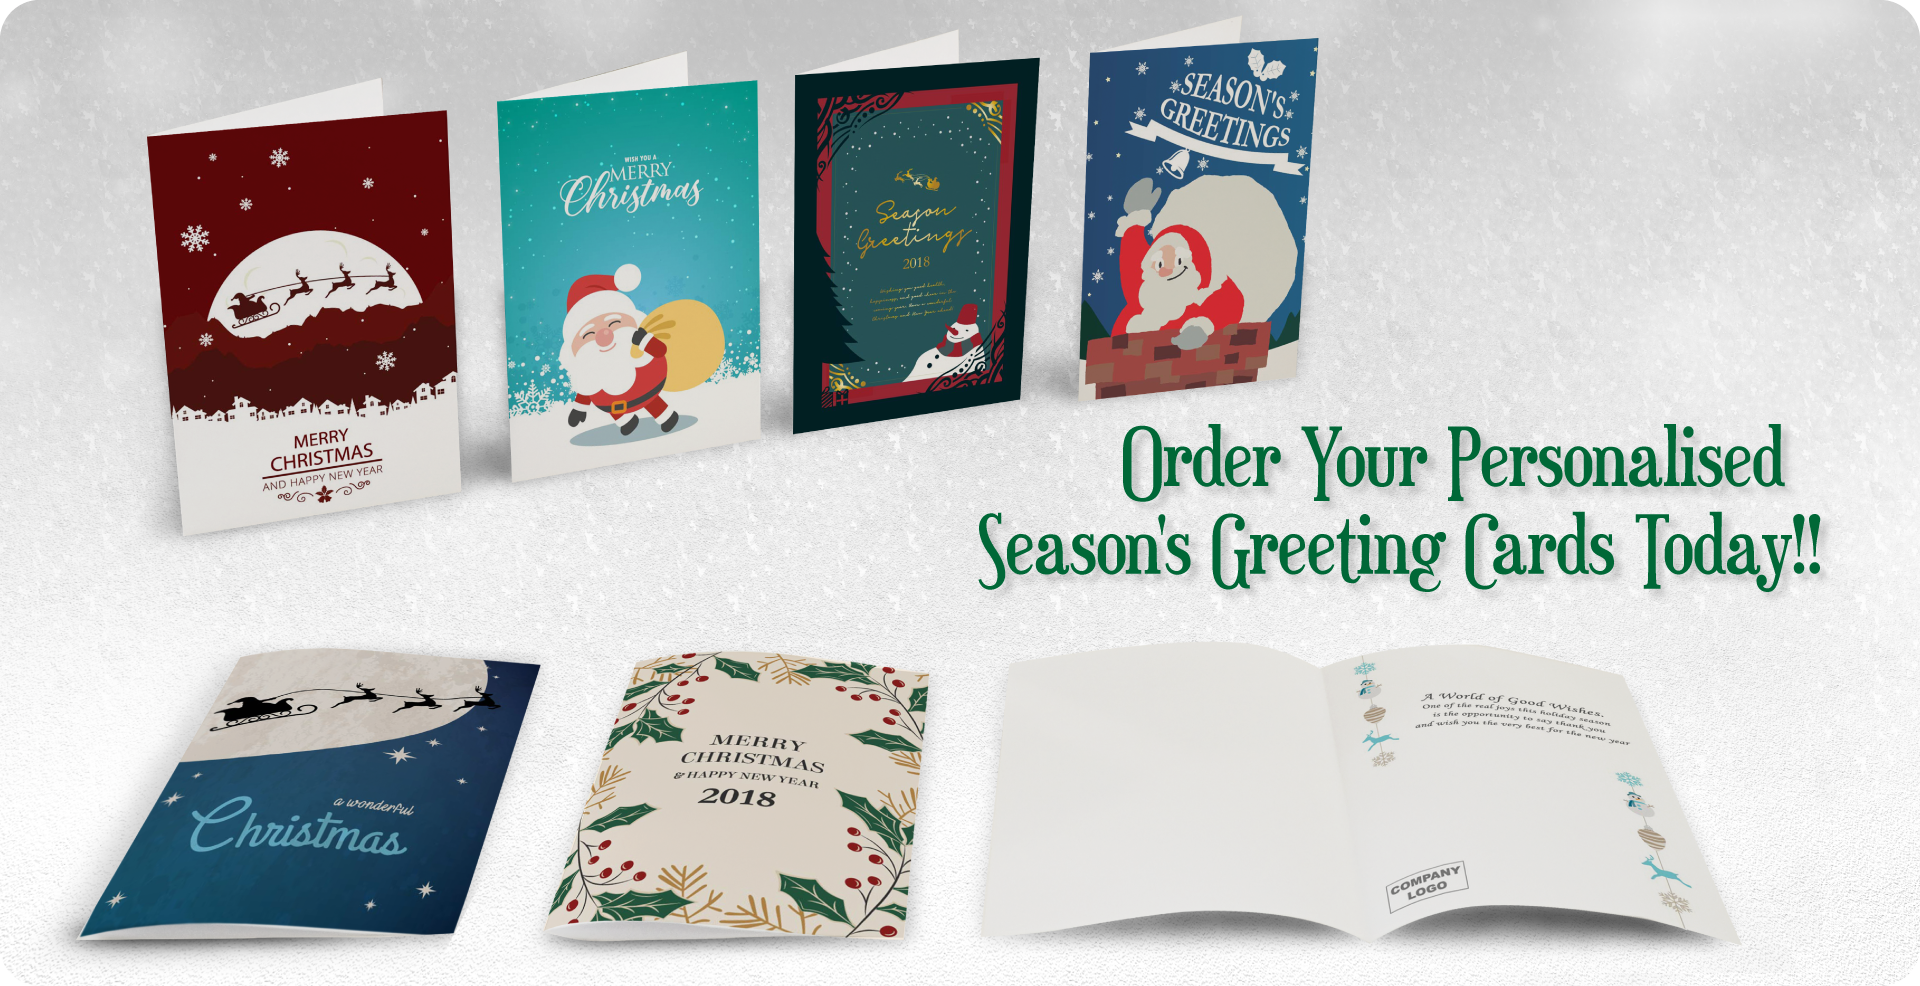 Order Your Personalised Season's Greeting Cards Today!!